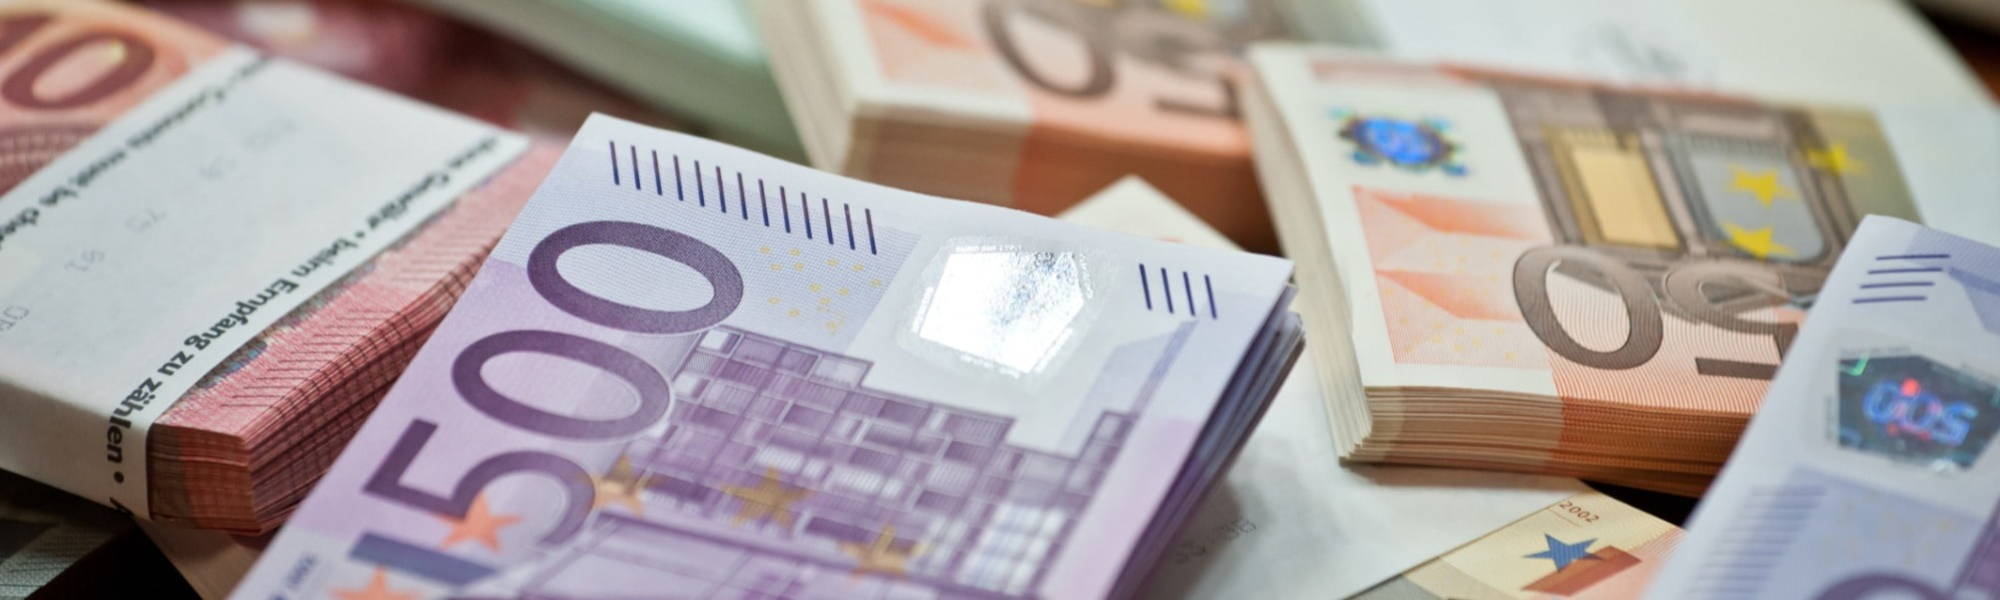 euro notes stacked, typical salaries wages in Ireland Europe